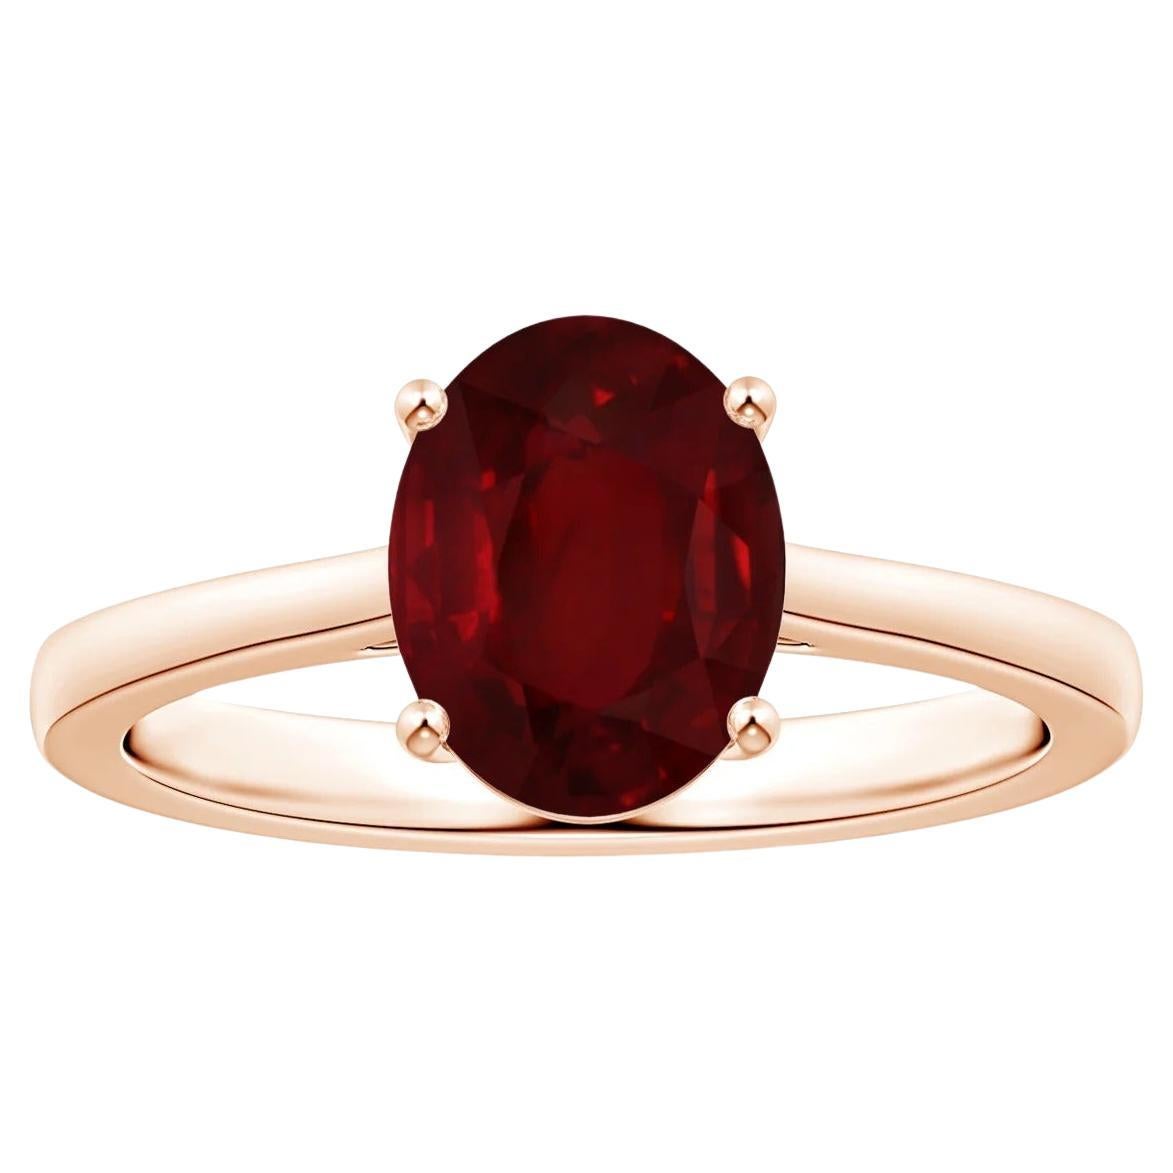 ANGARA GIA Certified Ruby Solitaire Ring in Rose Gold with Reverse Tapered Shank